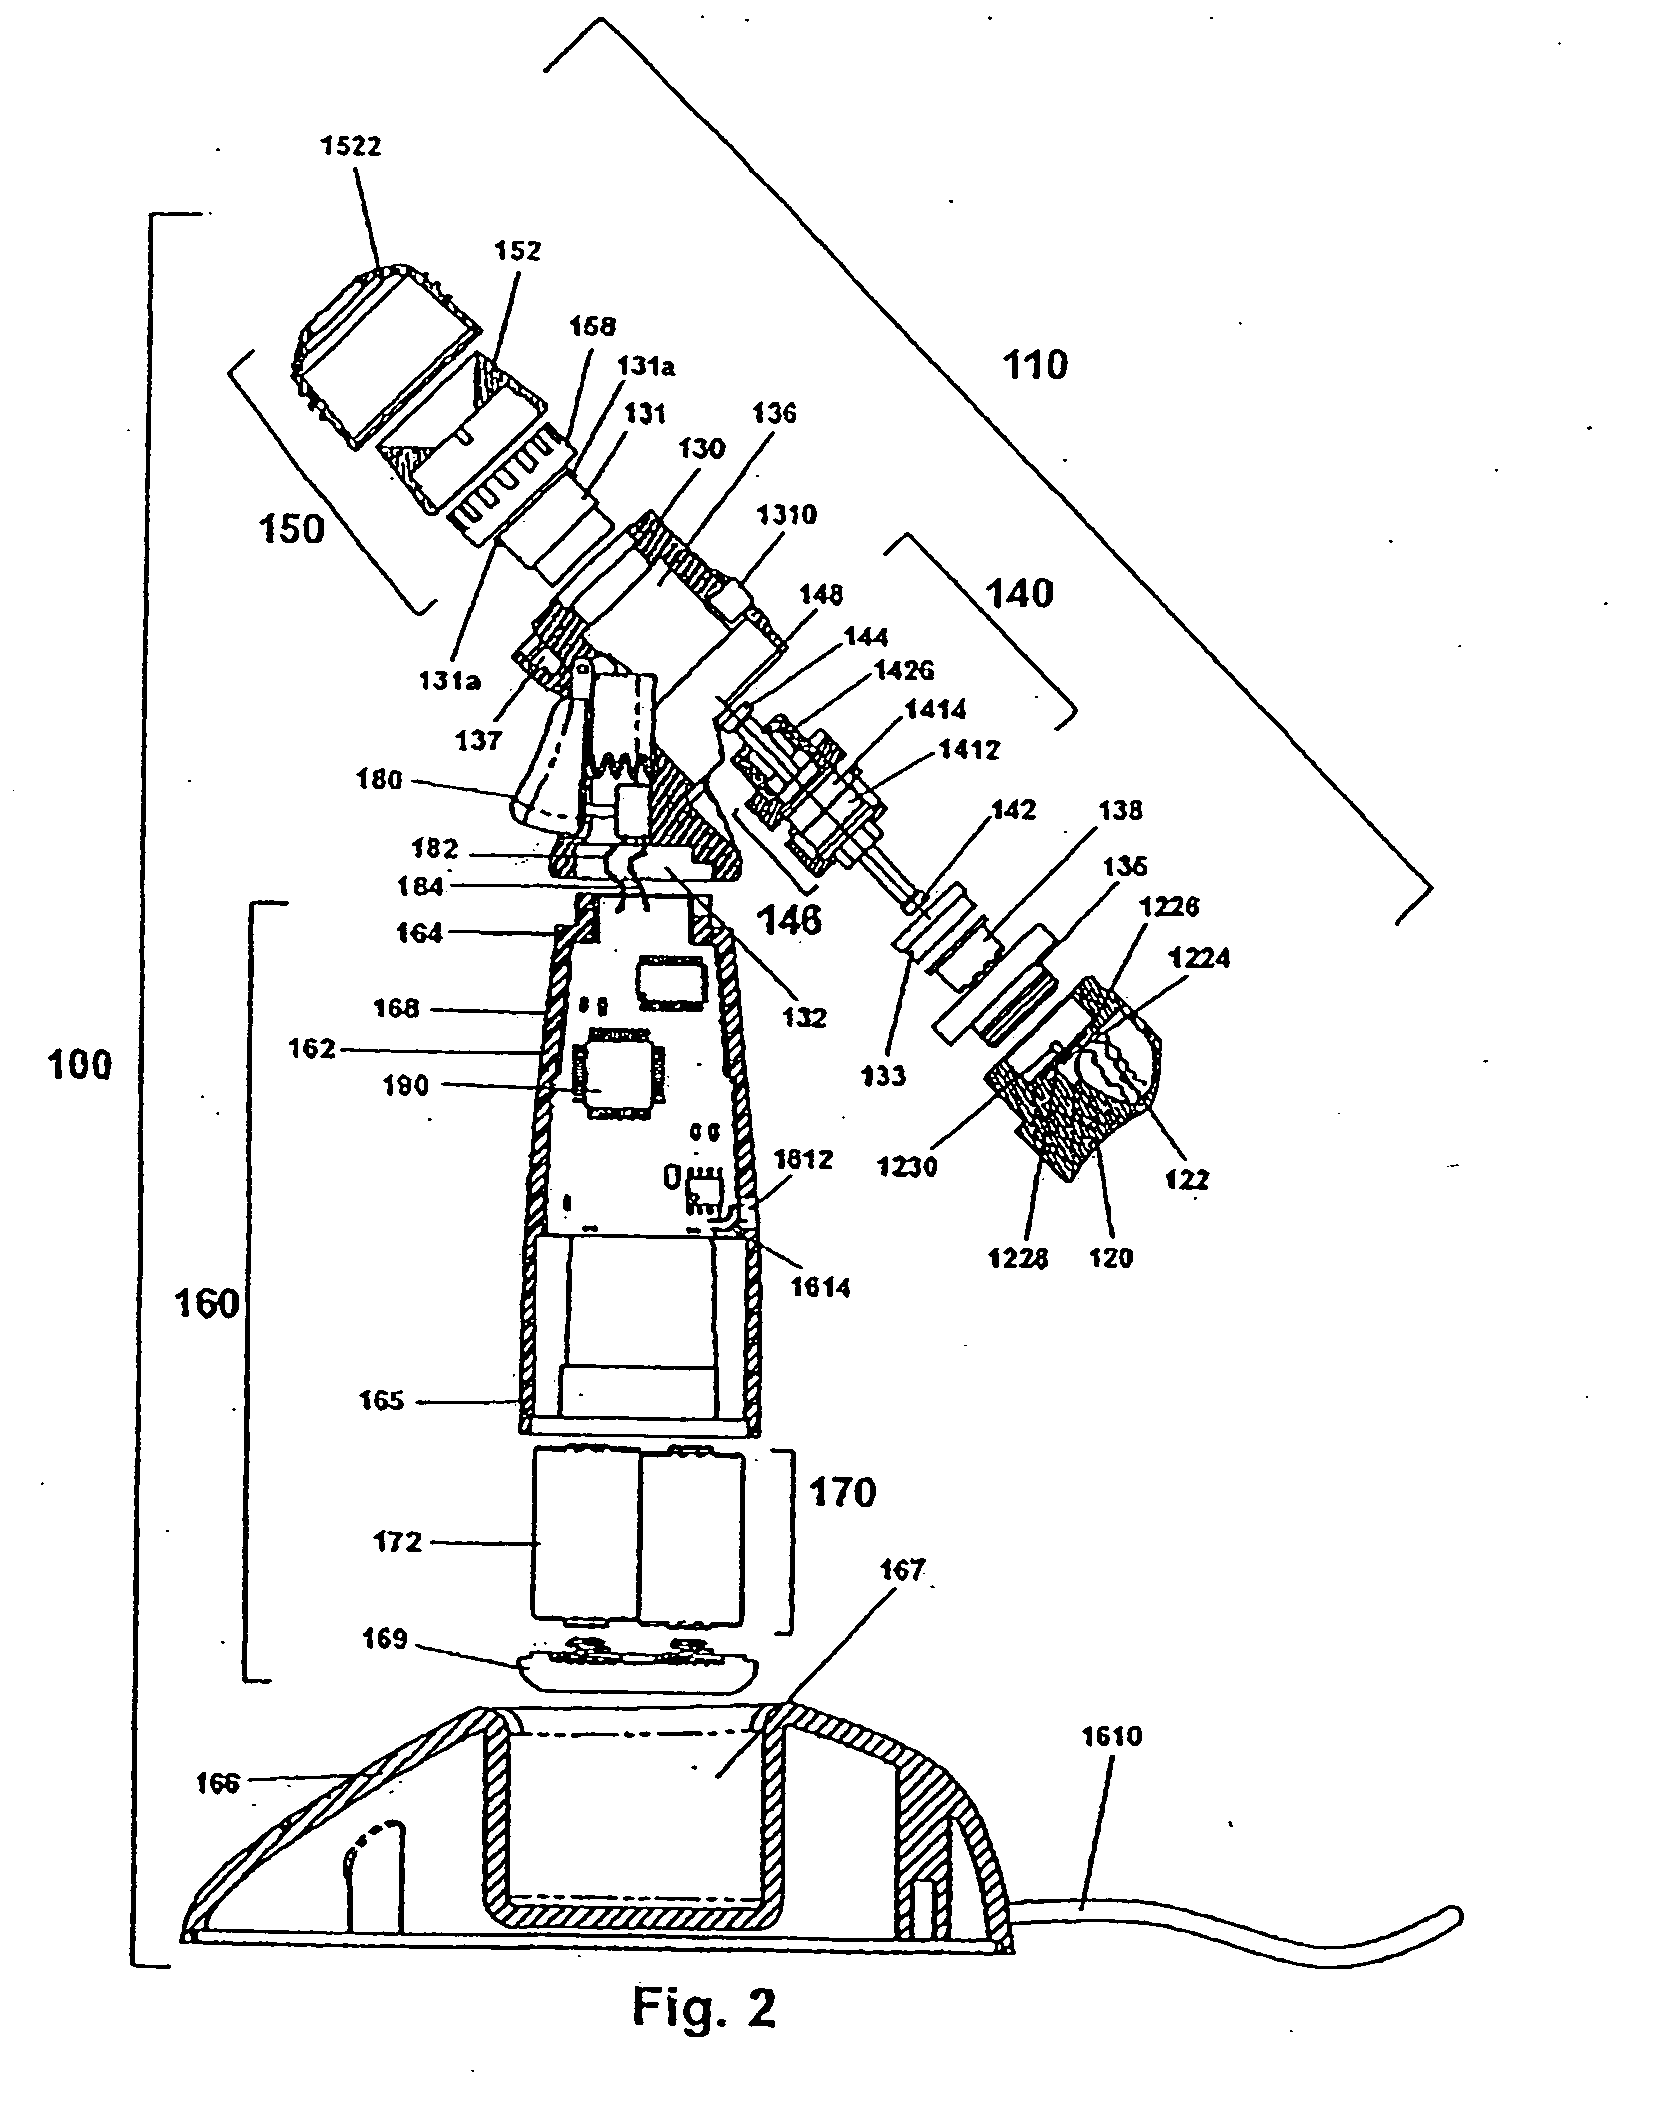 Ophthalmic fluid delivery system